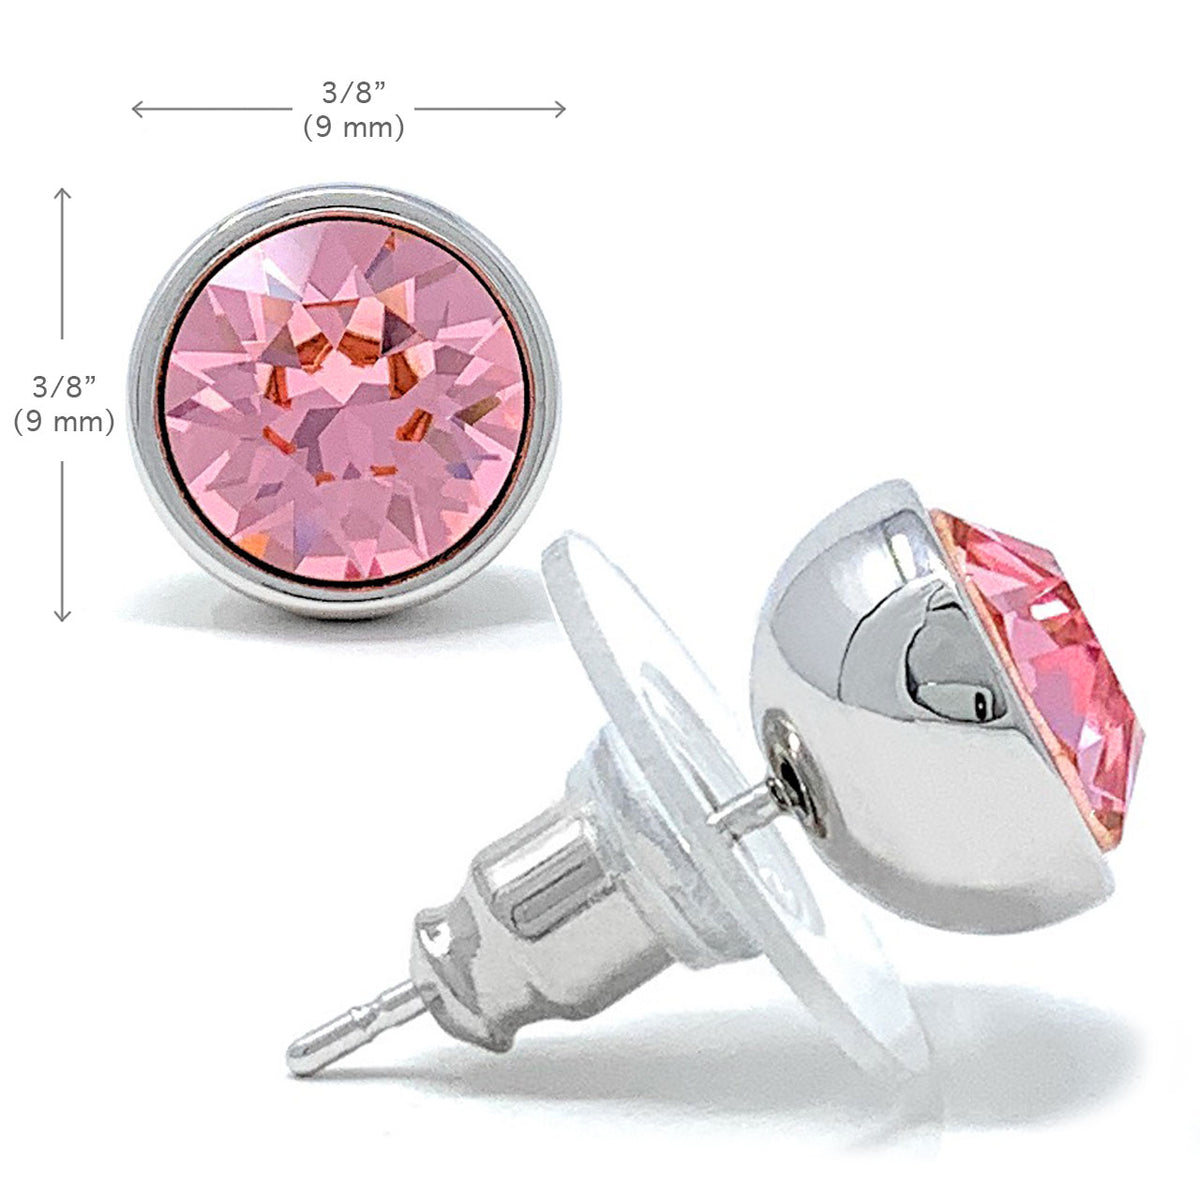 Harley Stud Earrings with Pink Light Rose Round Crystals from Swarovski Silver Toned Rhodium Plated - Ed Heart